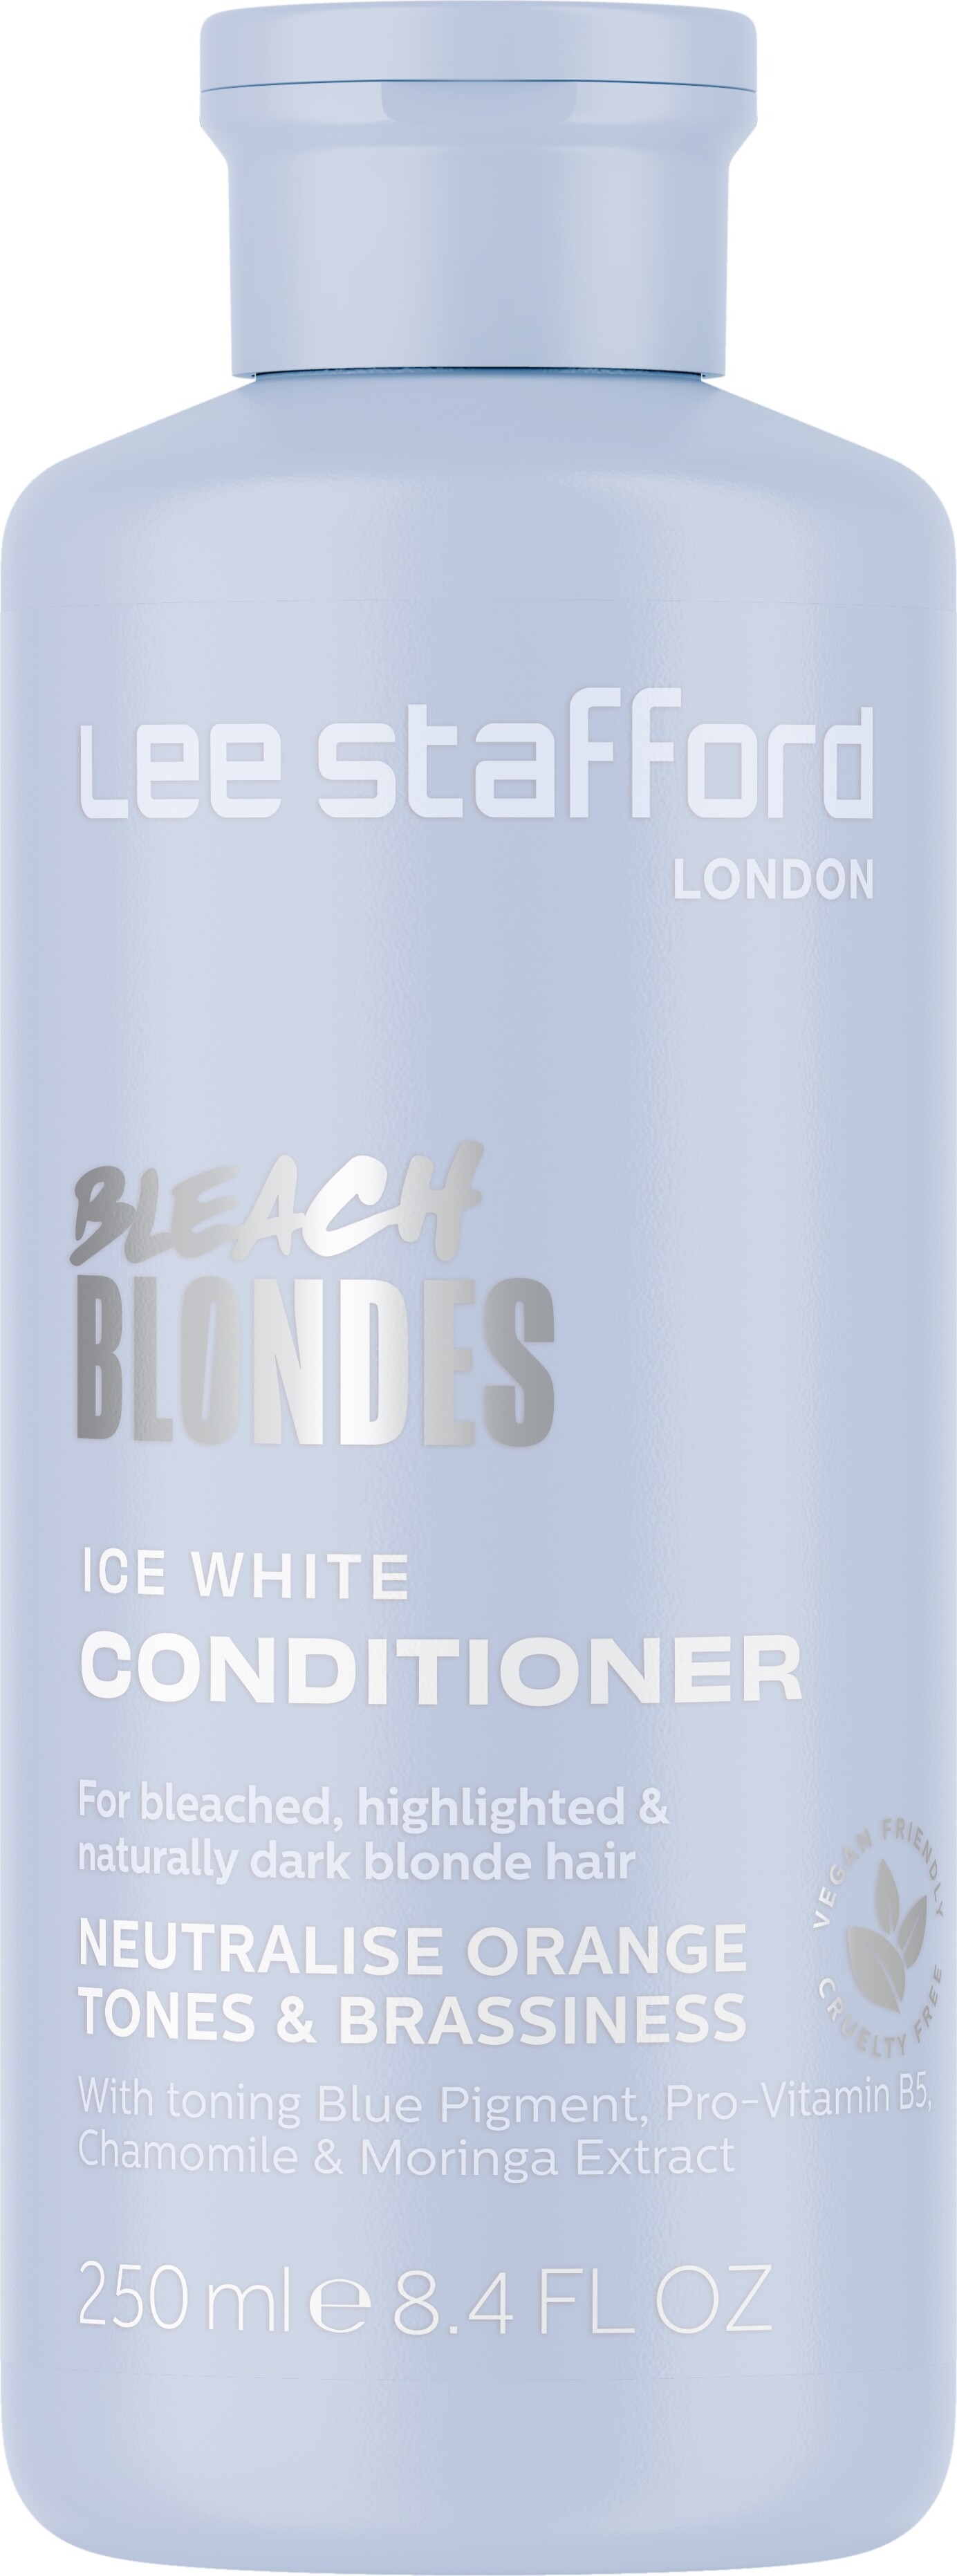 Lee Stafford - Bleach Blondes Ice White Toning Conditioner - 250 Ml